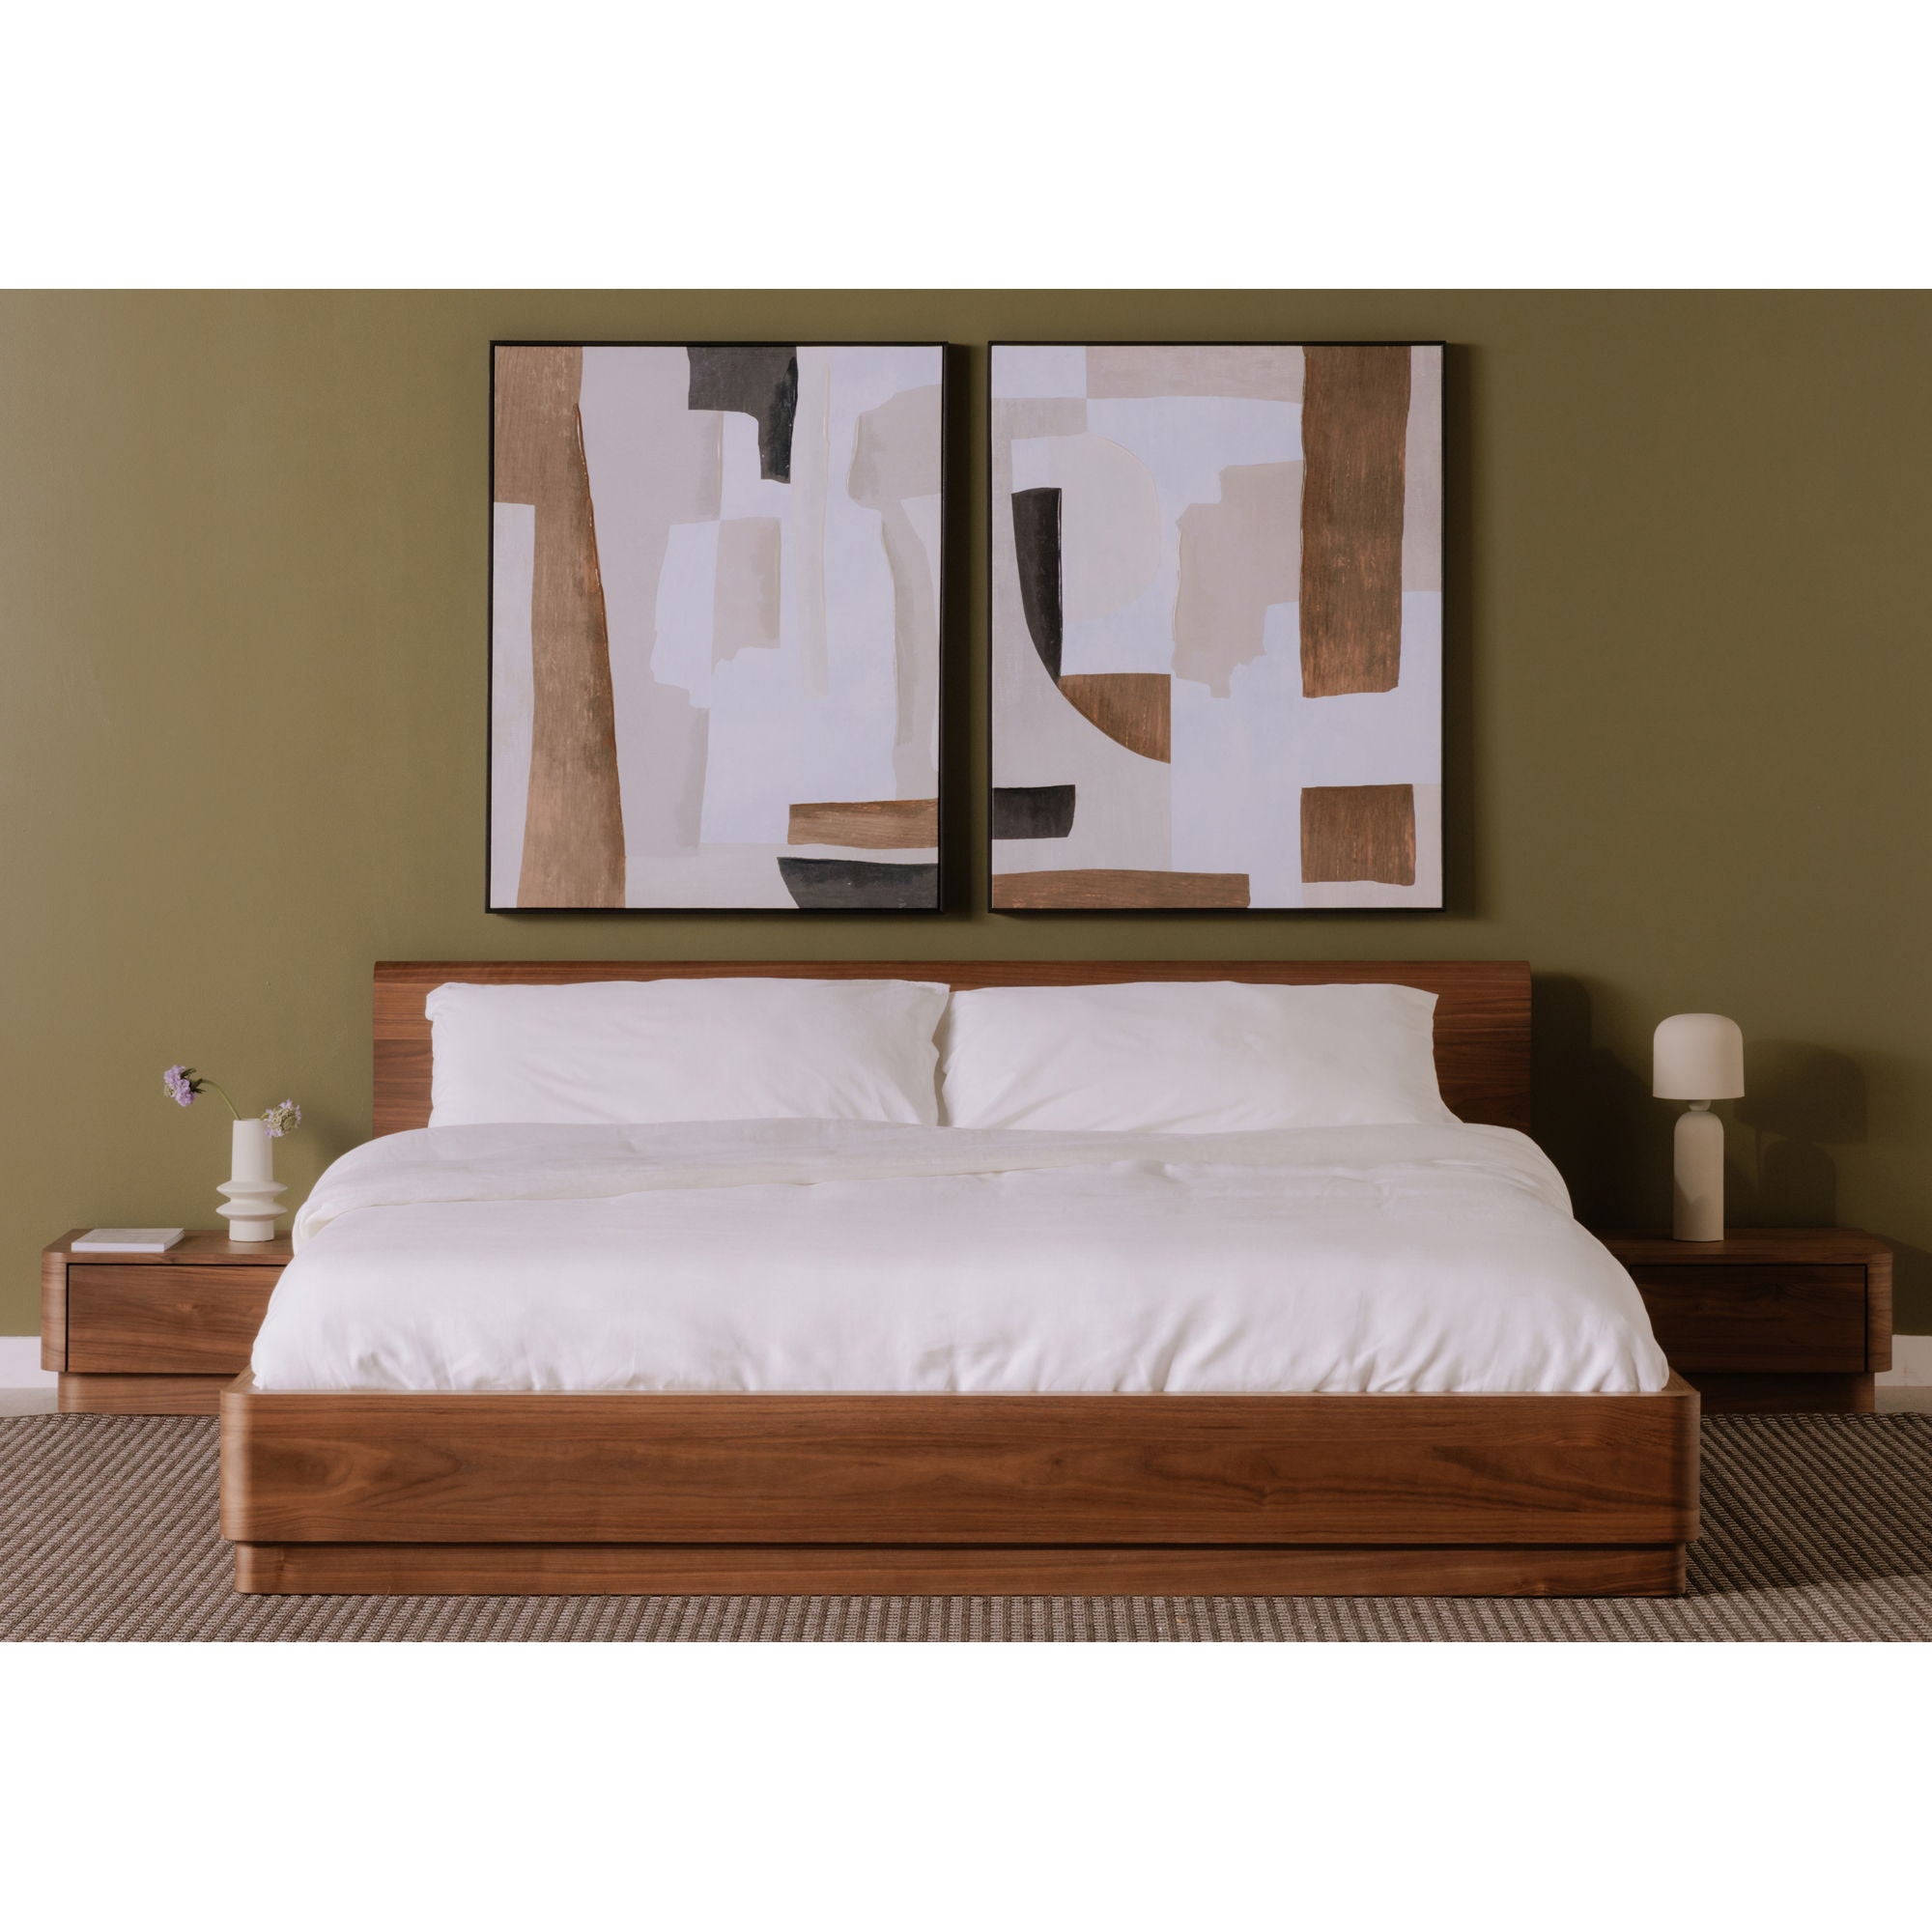 Round Off - King Bed - Natural Walnut